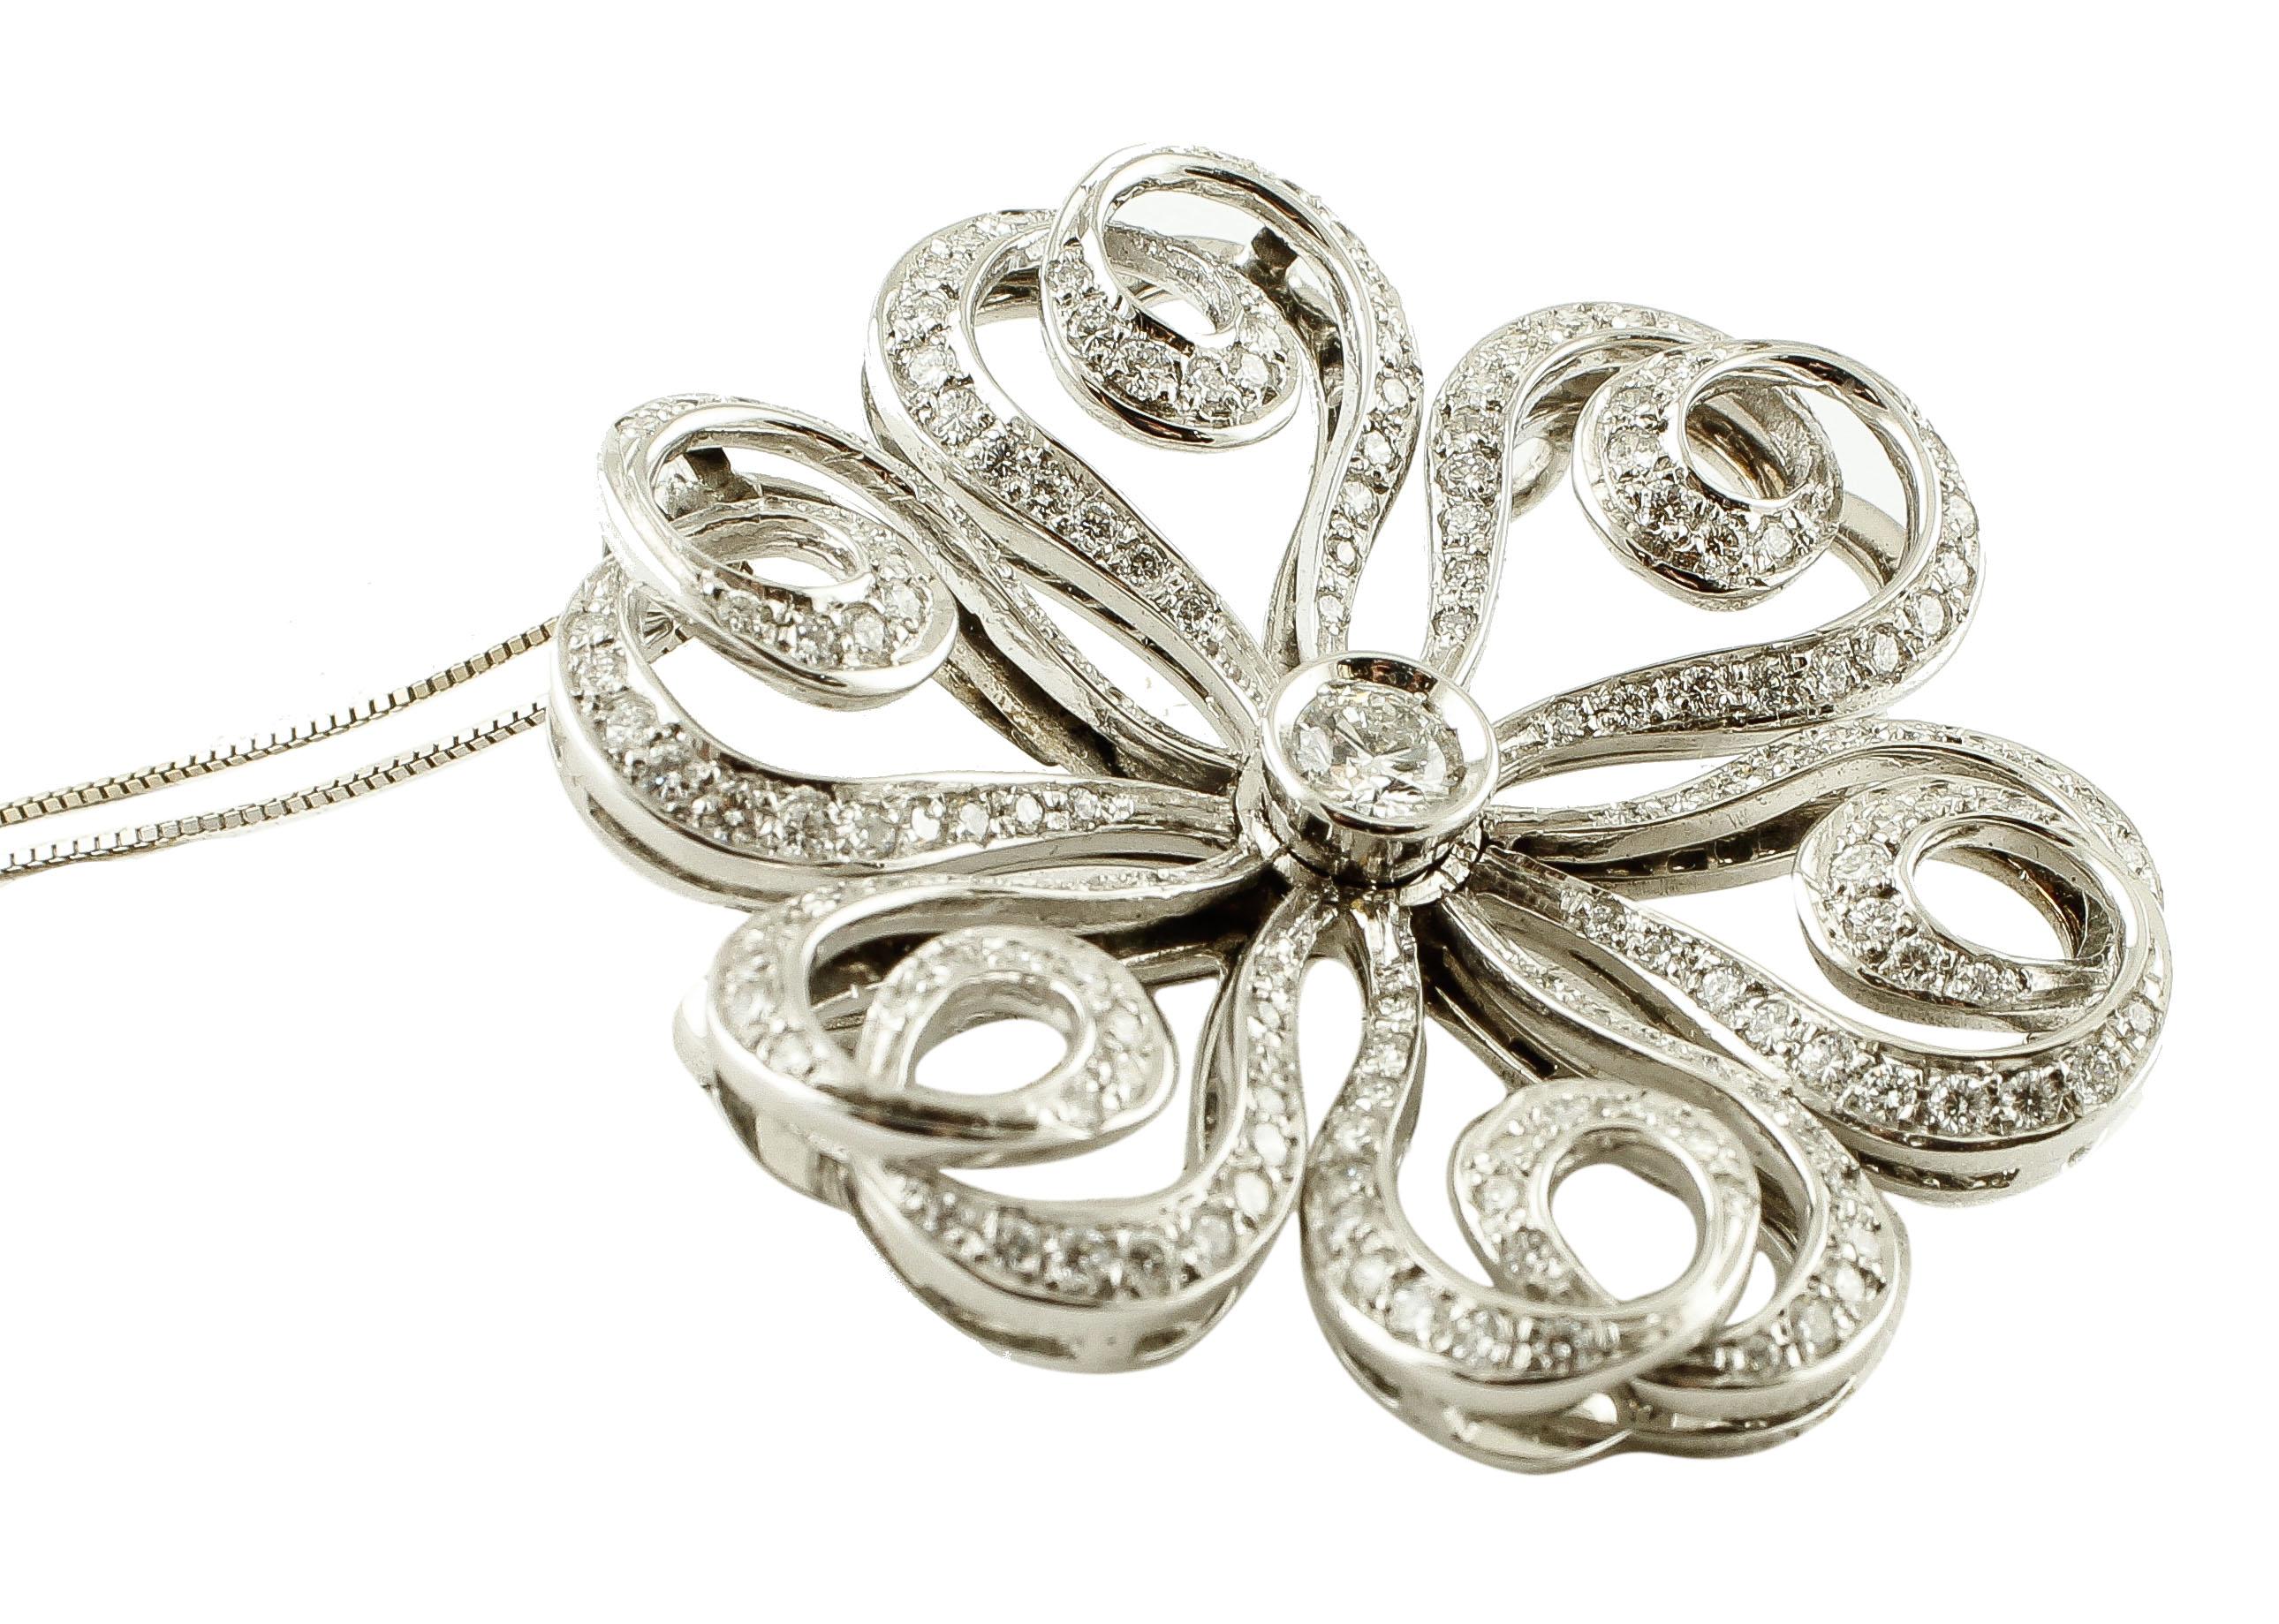 Brilliant Cut Diamonds and 18 Karat White Gold Flower Brooch 'Chain Not Included' For Sale